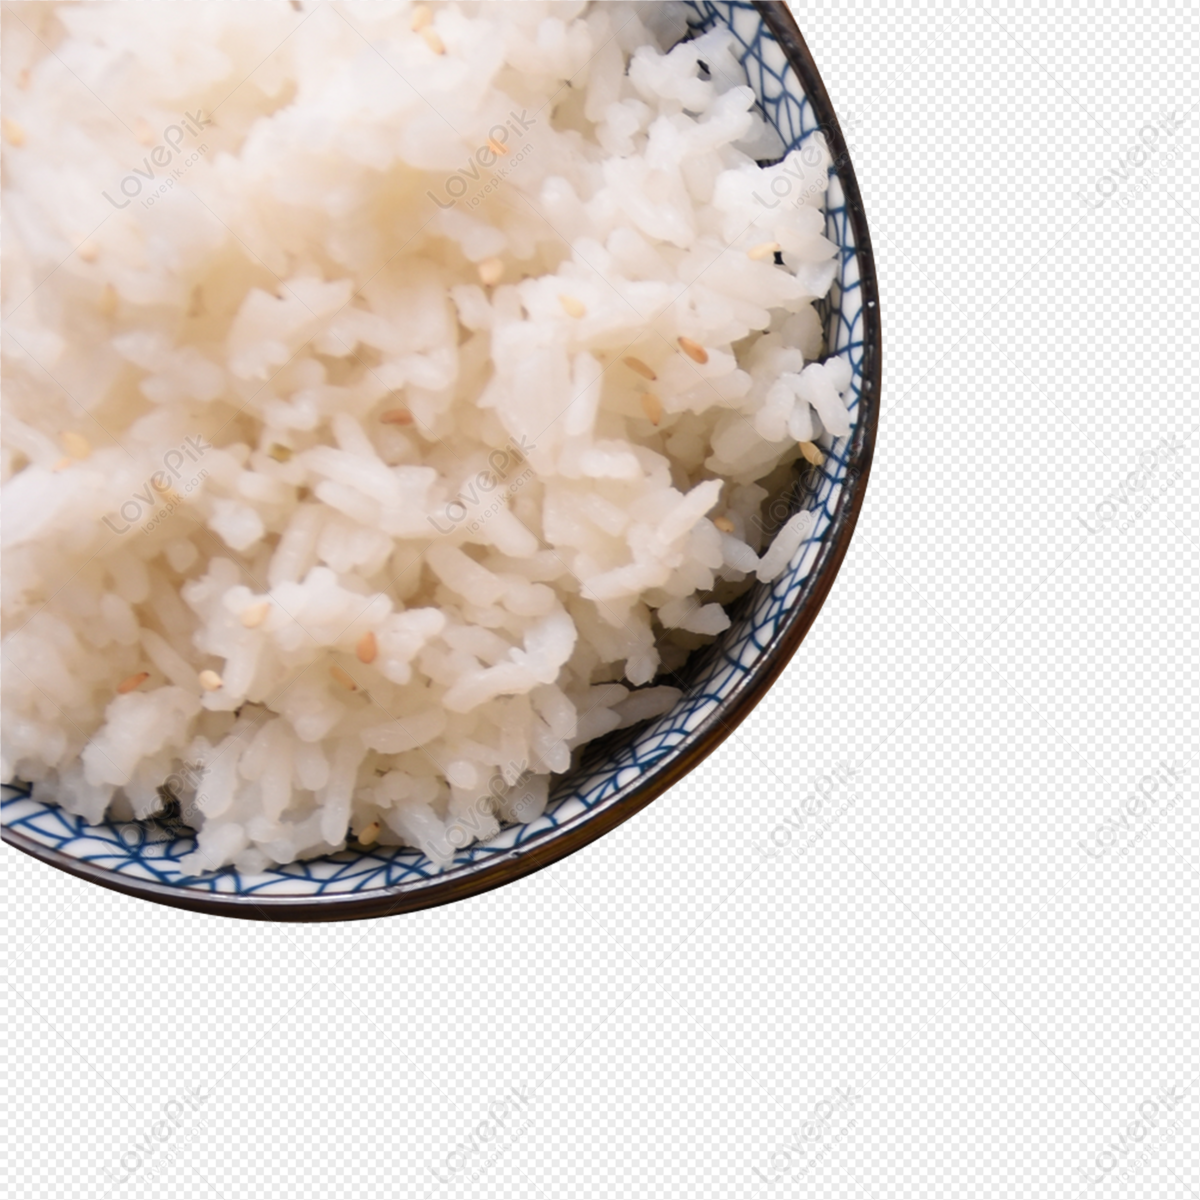 Rice steam or boil фото 1